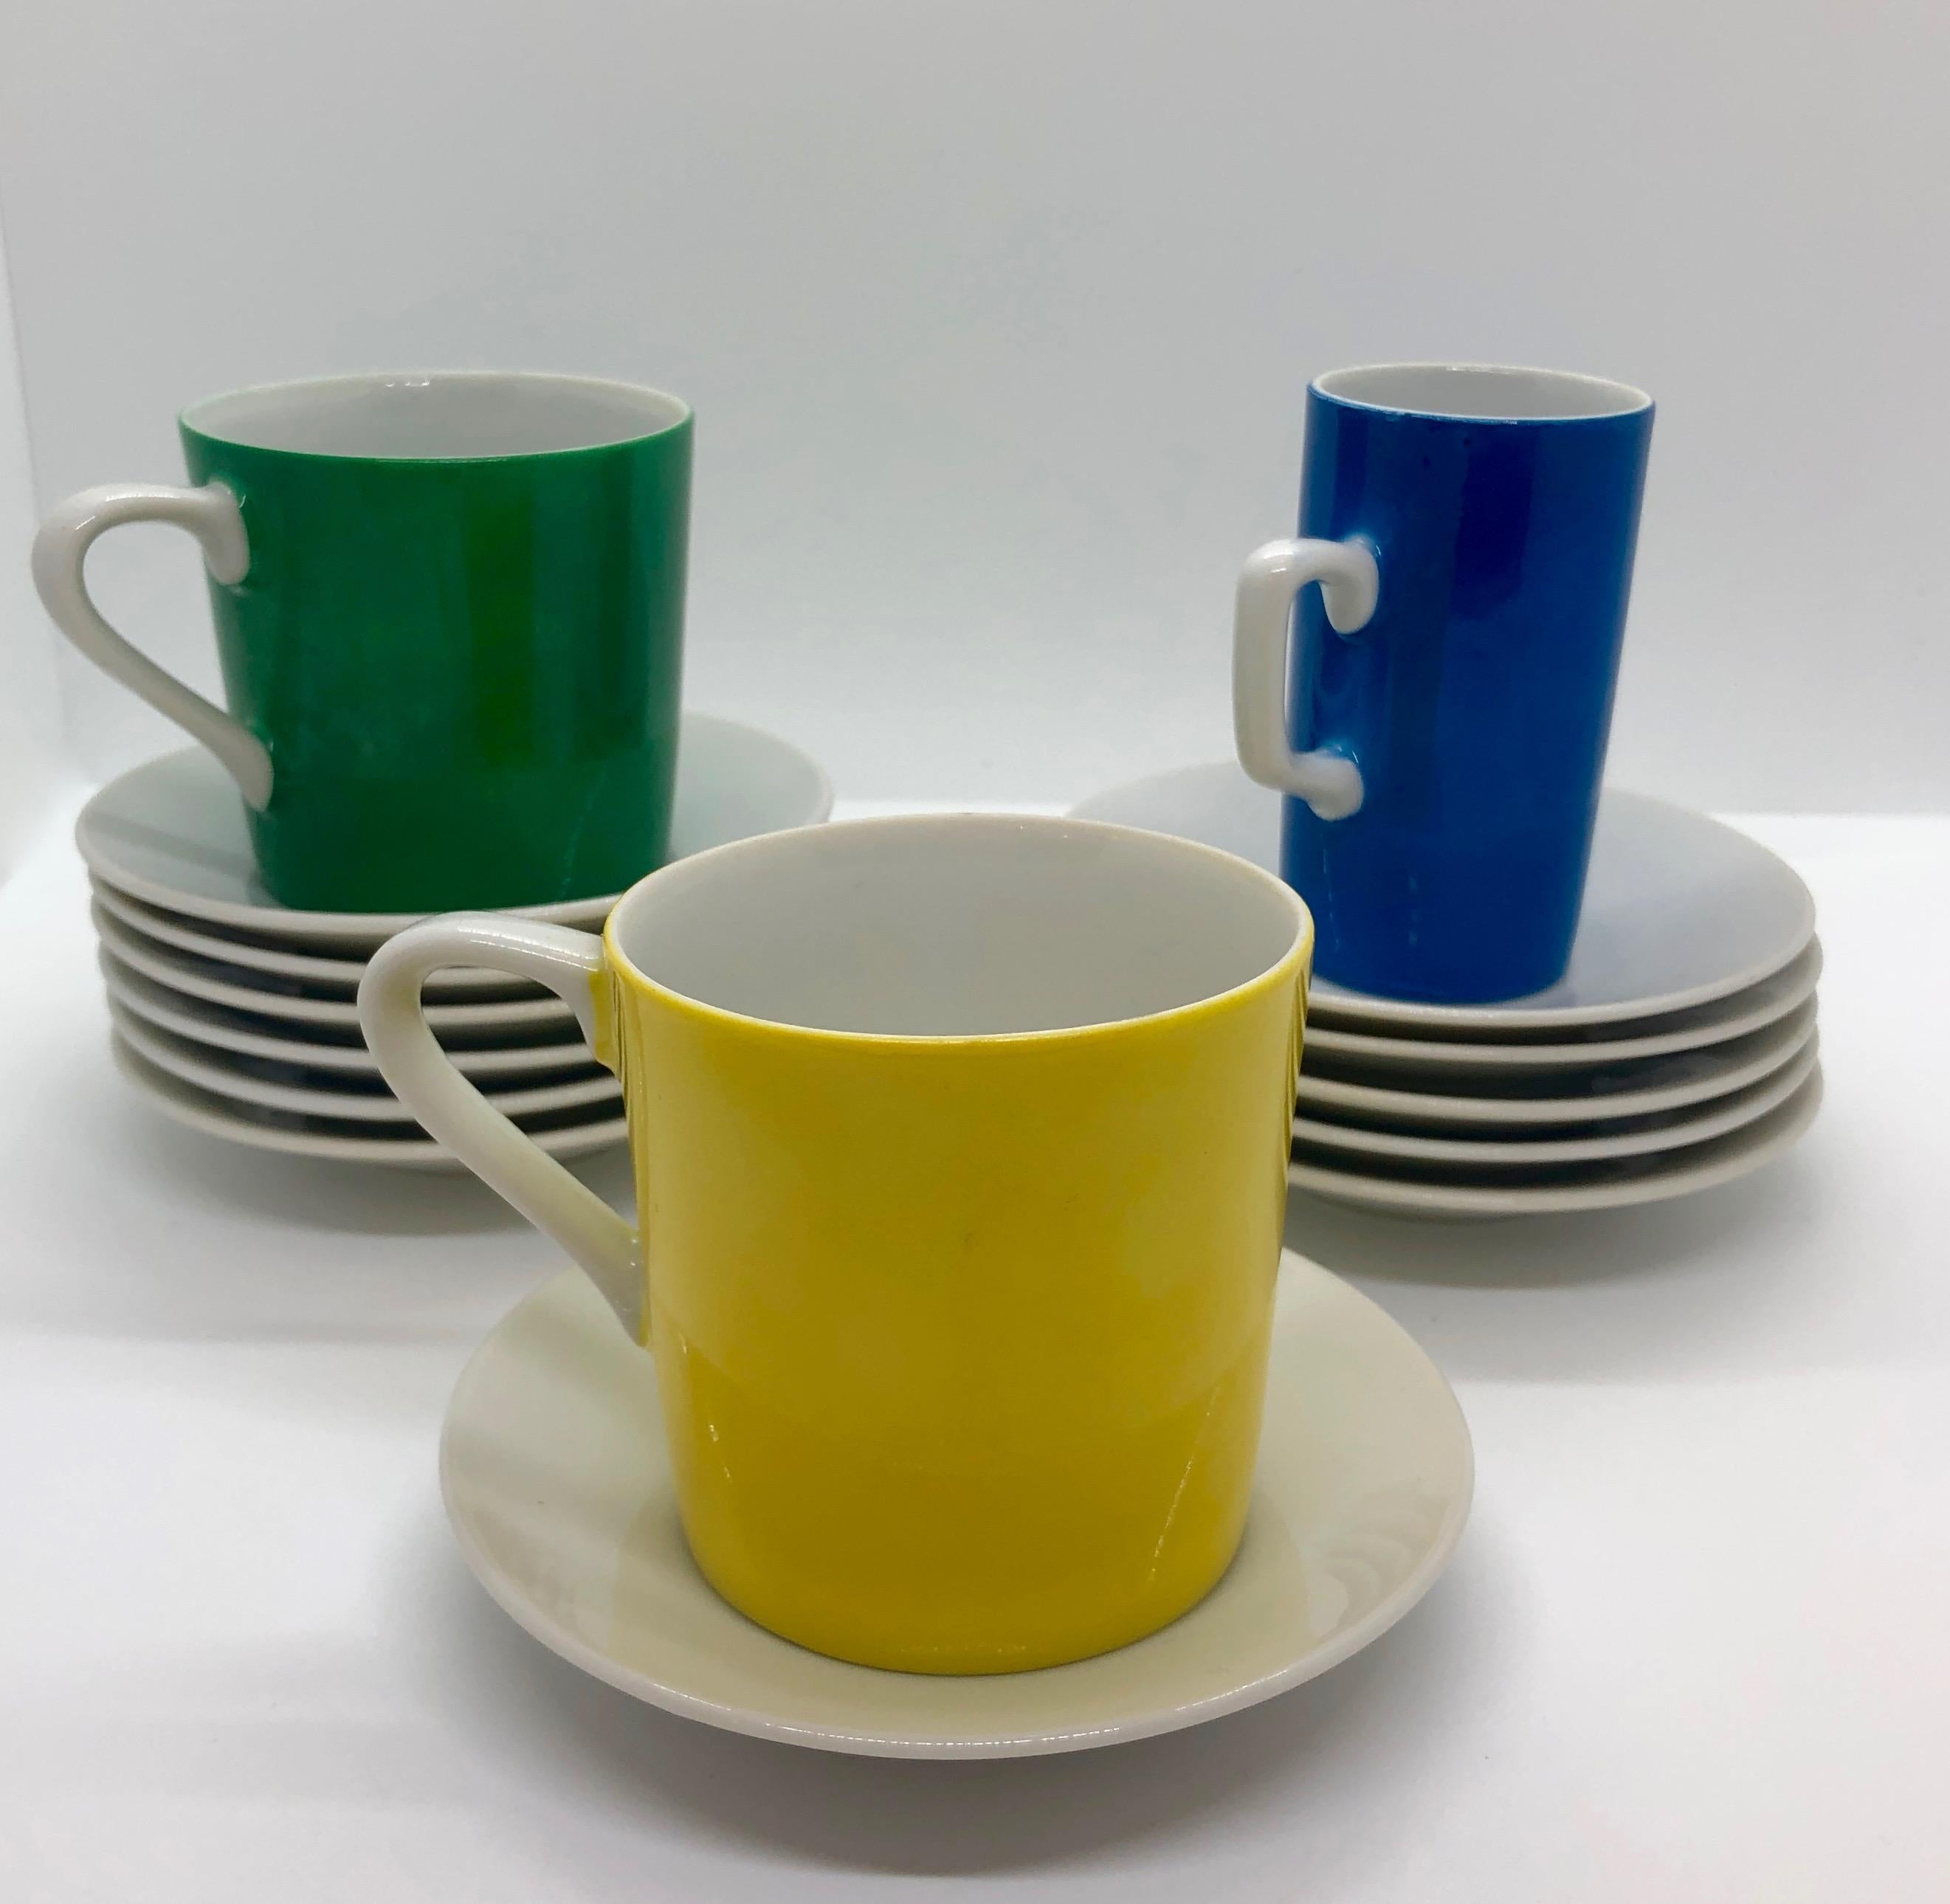 Japanese Green, Blue, Yellow, Pink and Gray Porcelain Coffee, Tea & Dessert Cups & Plates For Sale